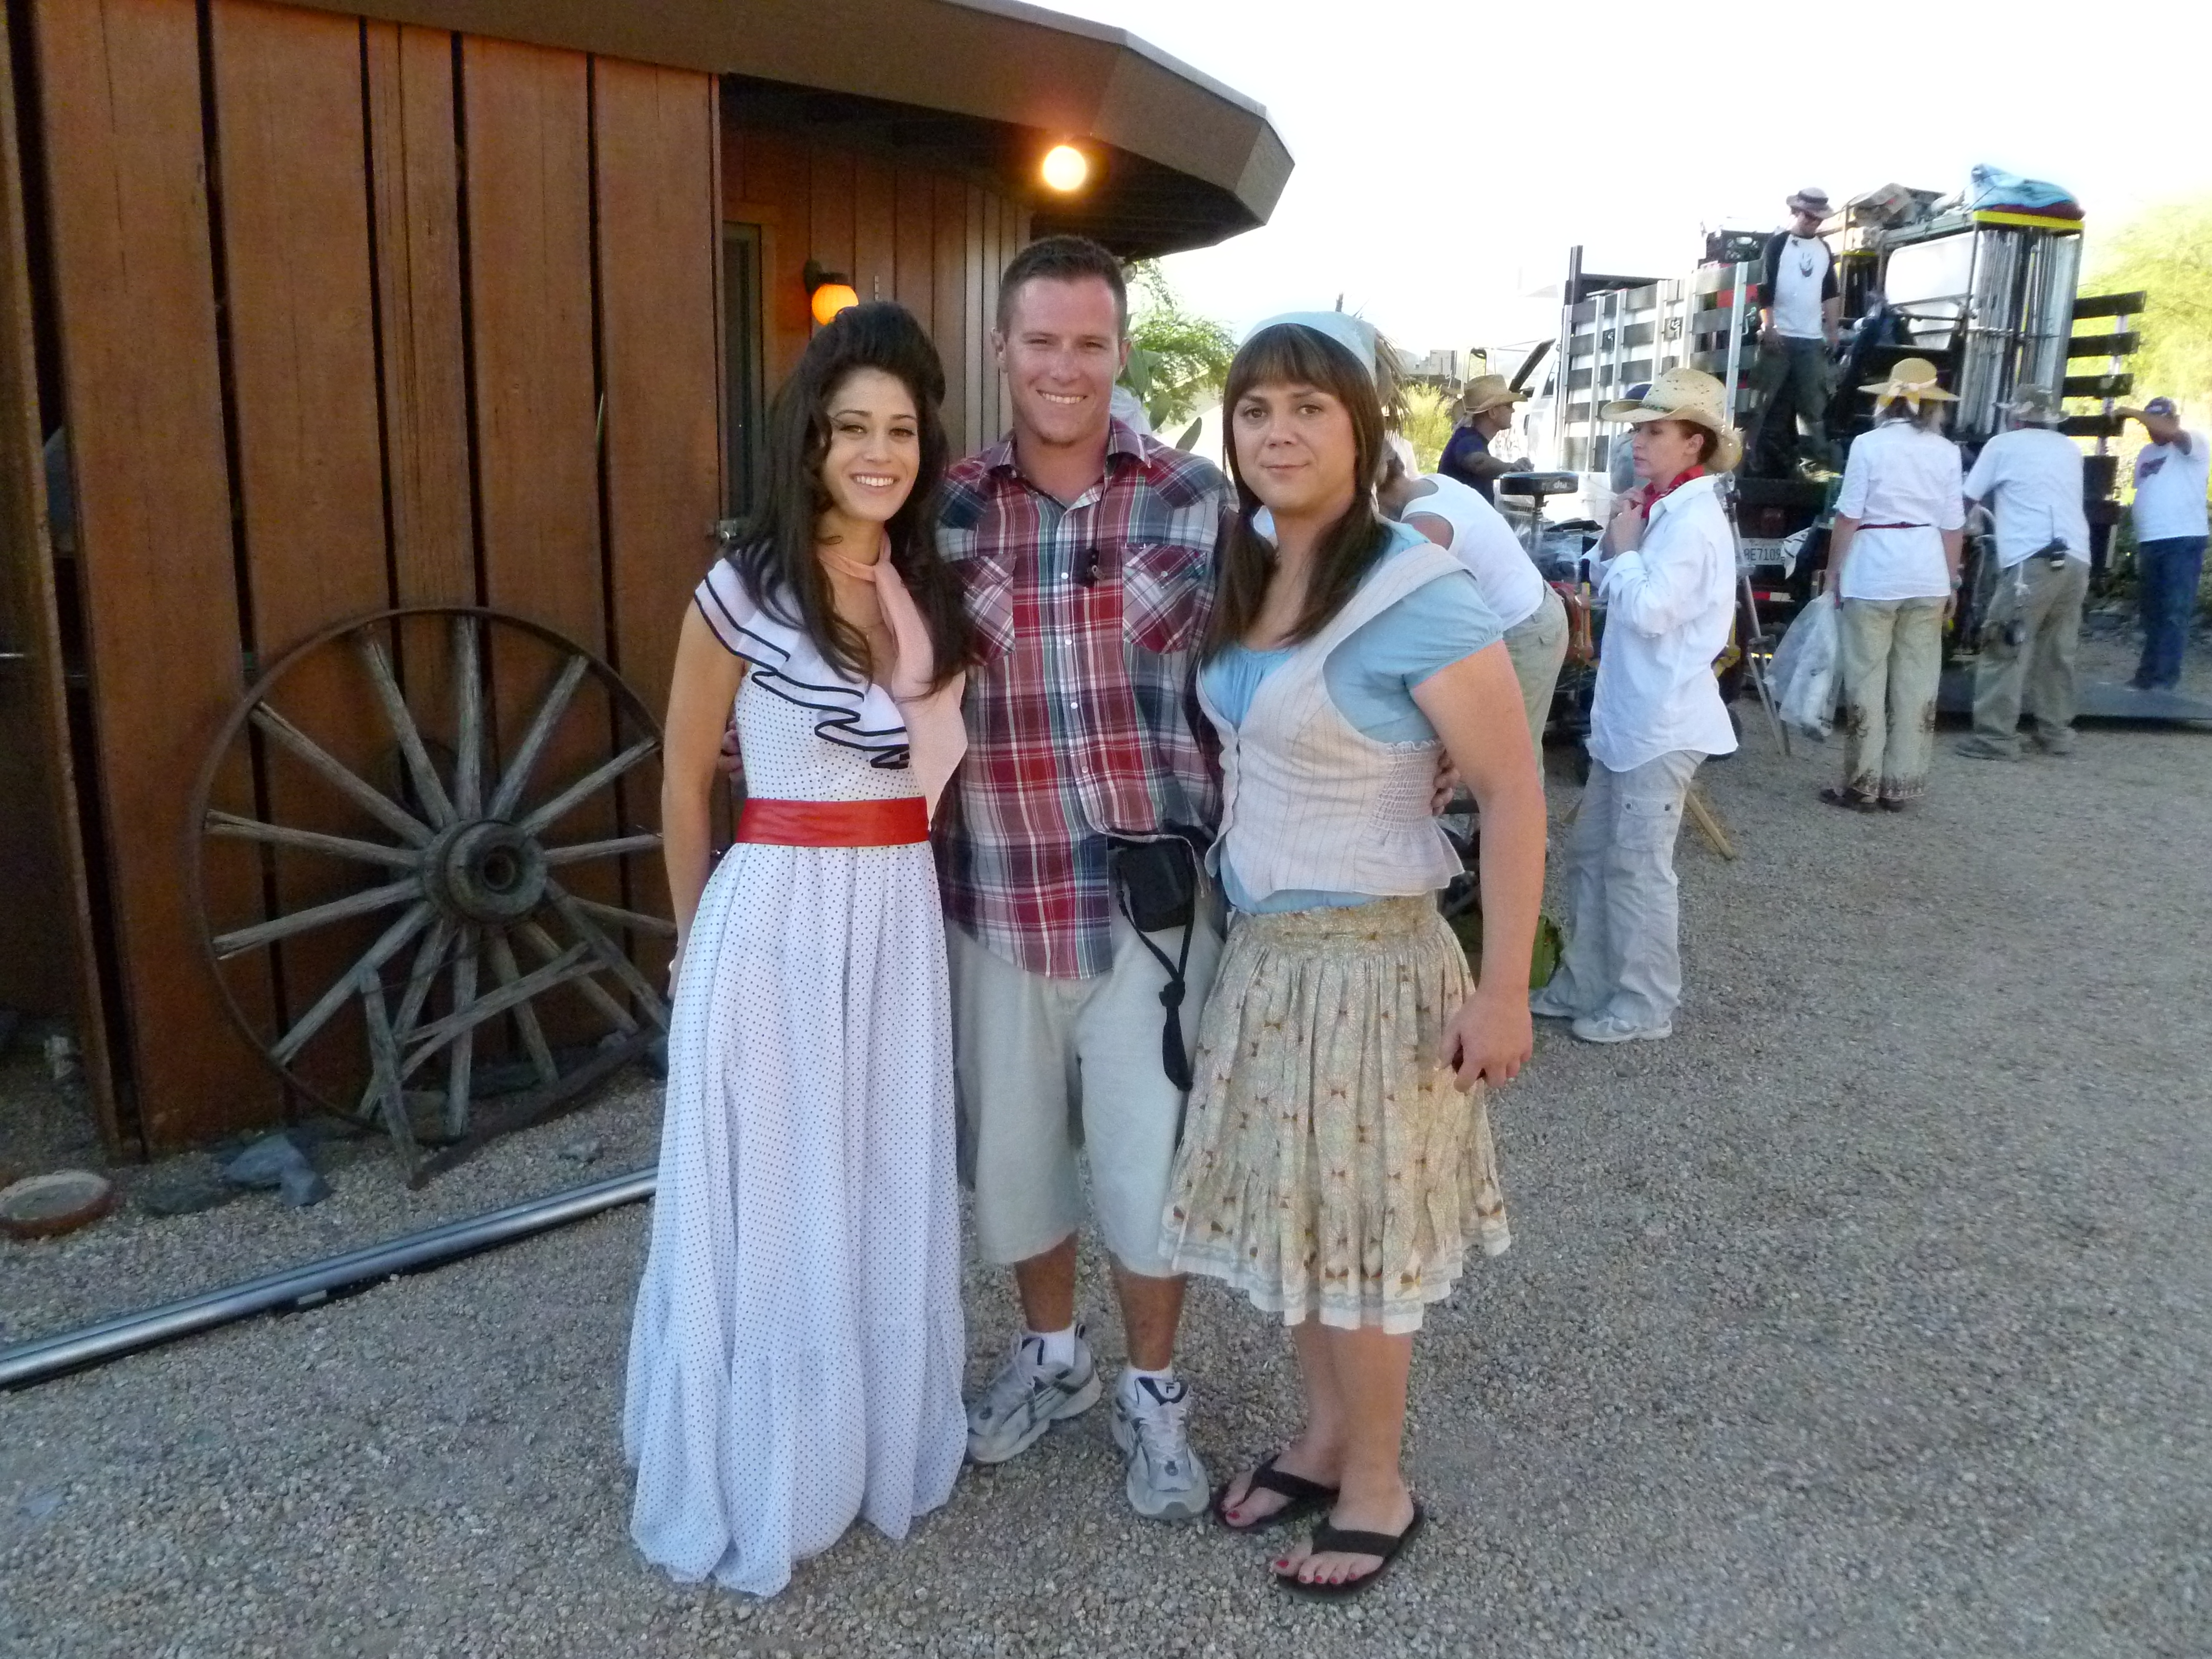 Lizzy Caplan, Travis A. McAfee, and Joe Lo Truglio during filming of Queens Of Country in Cave Creek , Arizona. (2010)